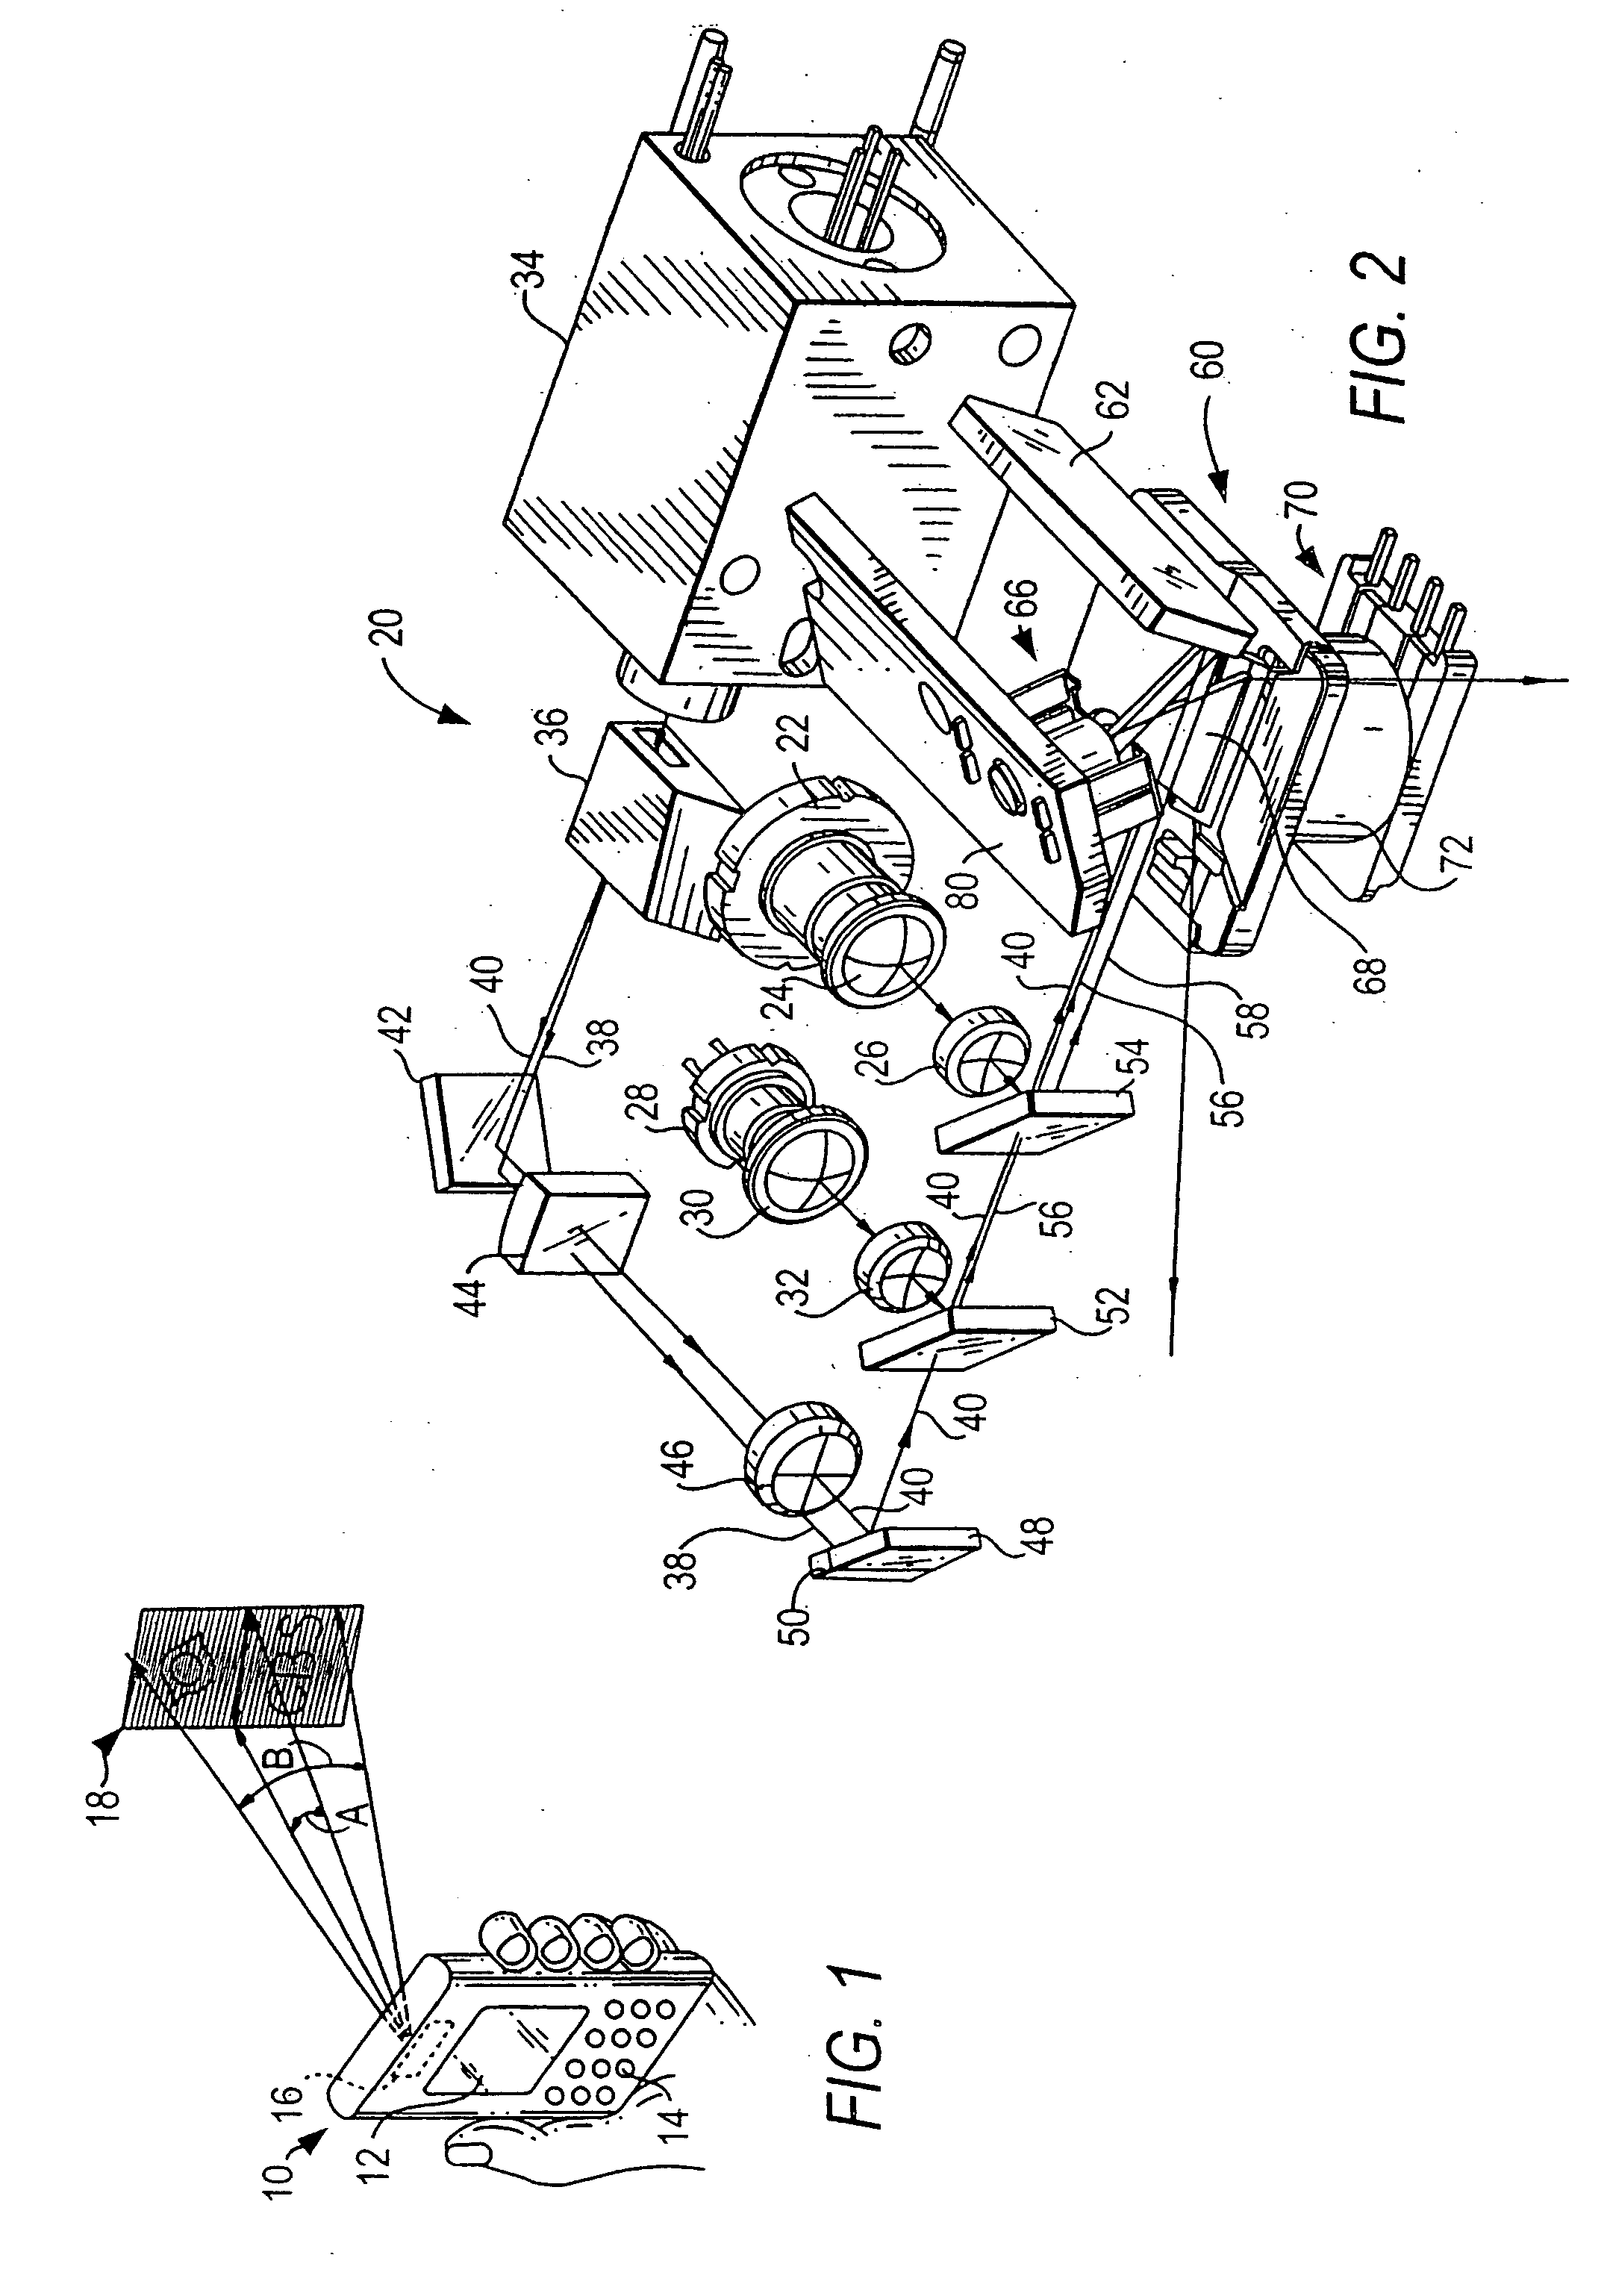 Arrangement for, and a method of, reducing image distortion due to electrical interference